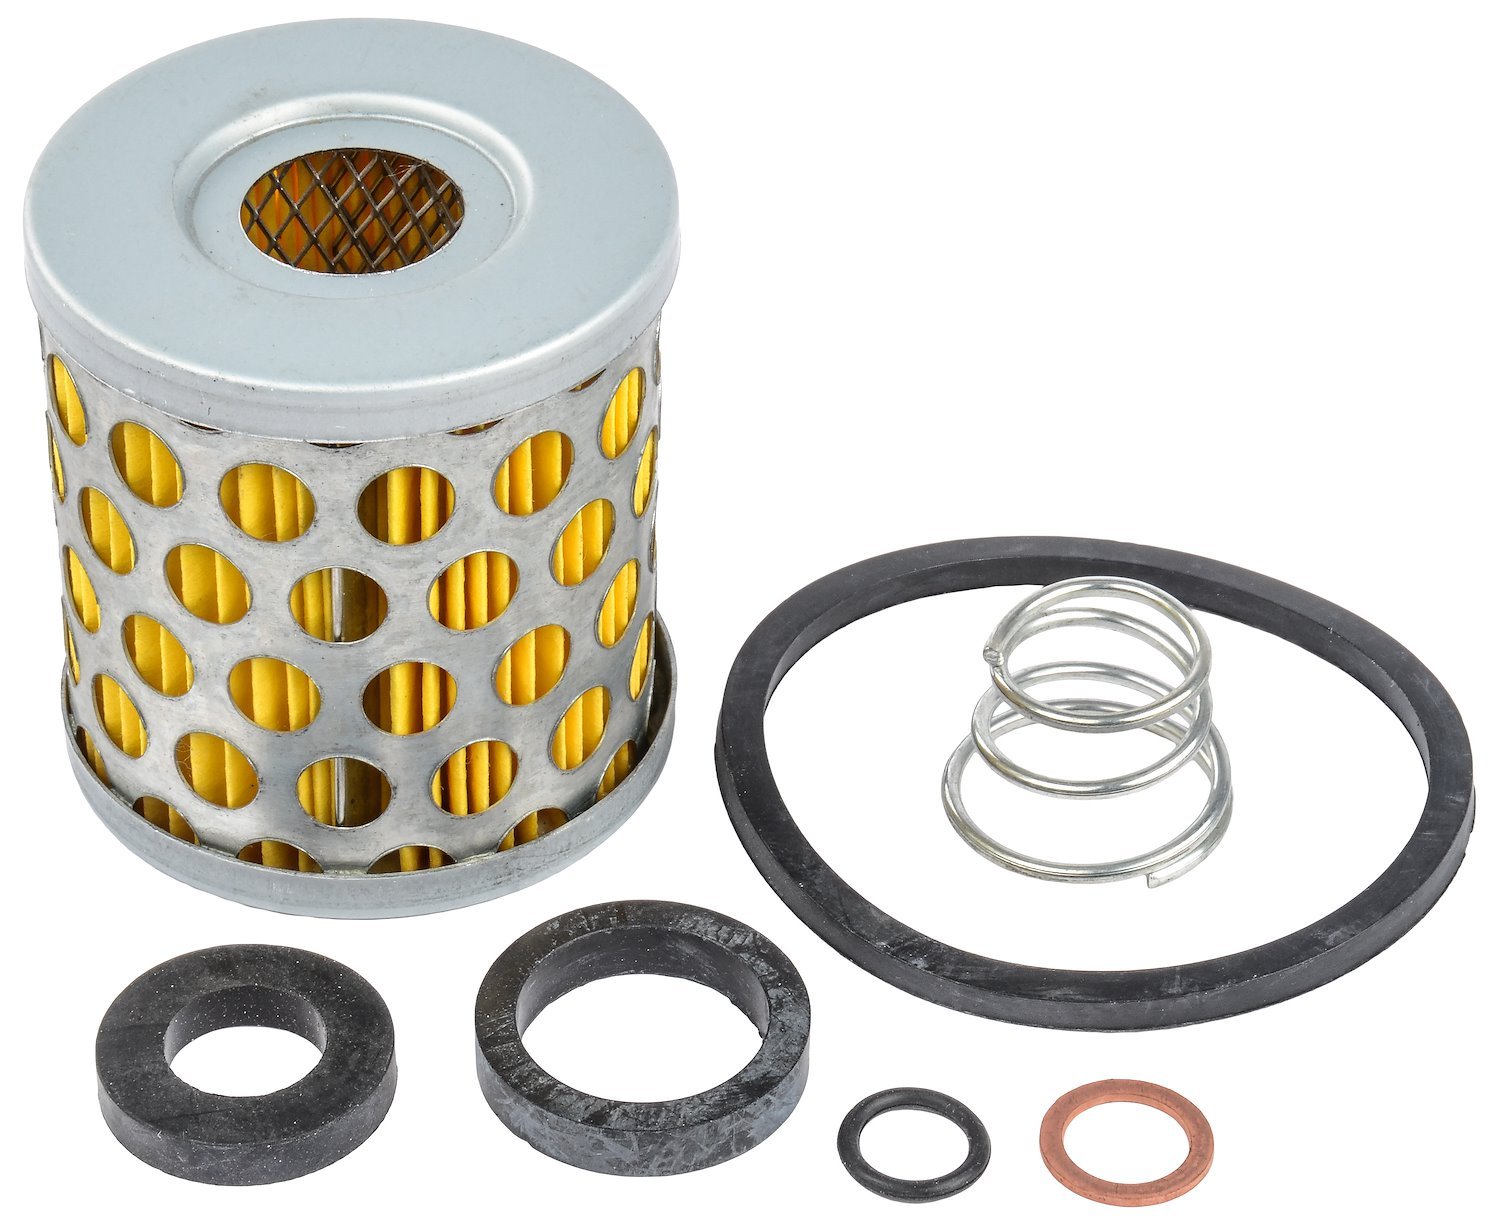 Replacement Fuel Filter Element For Street Filter